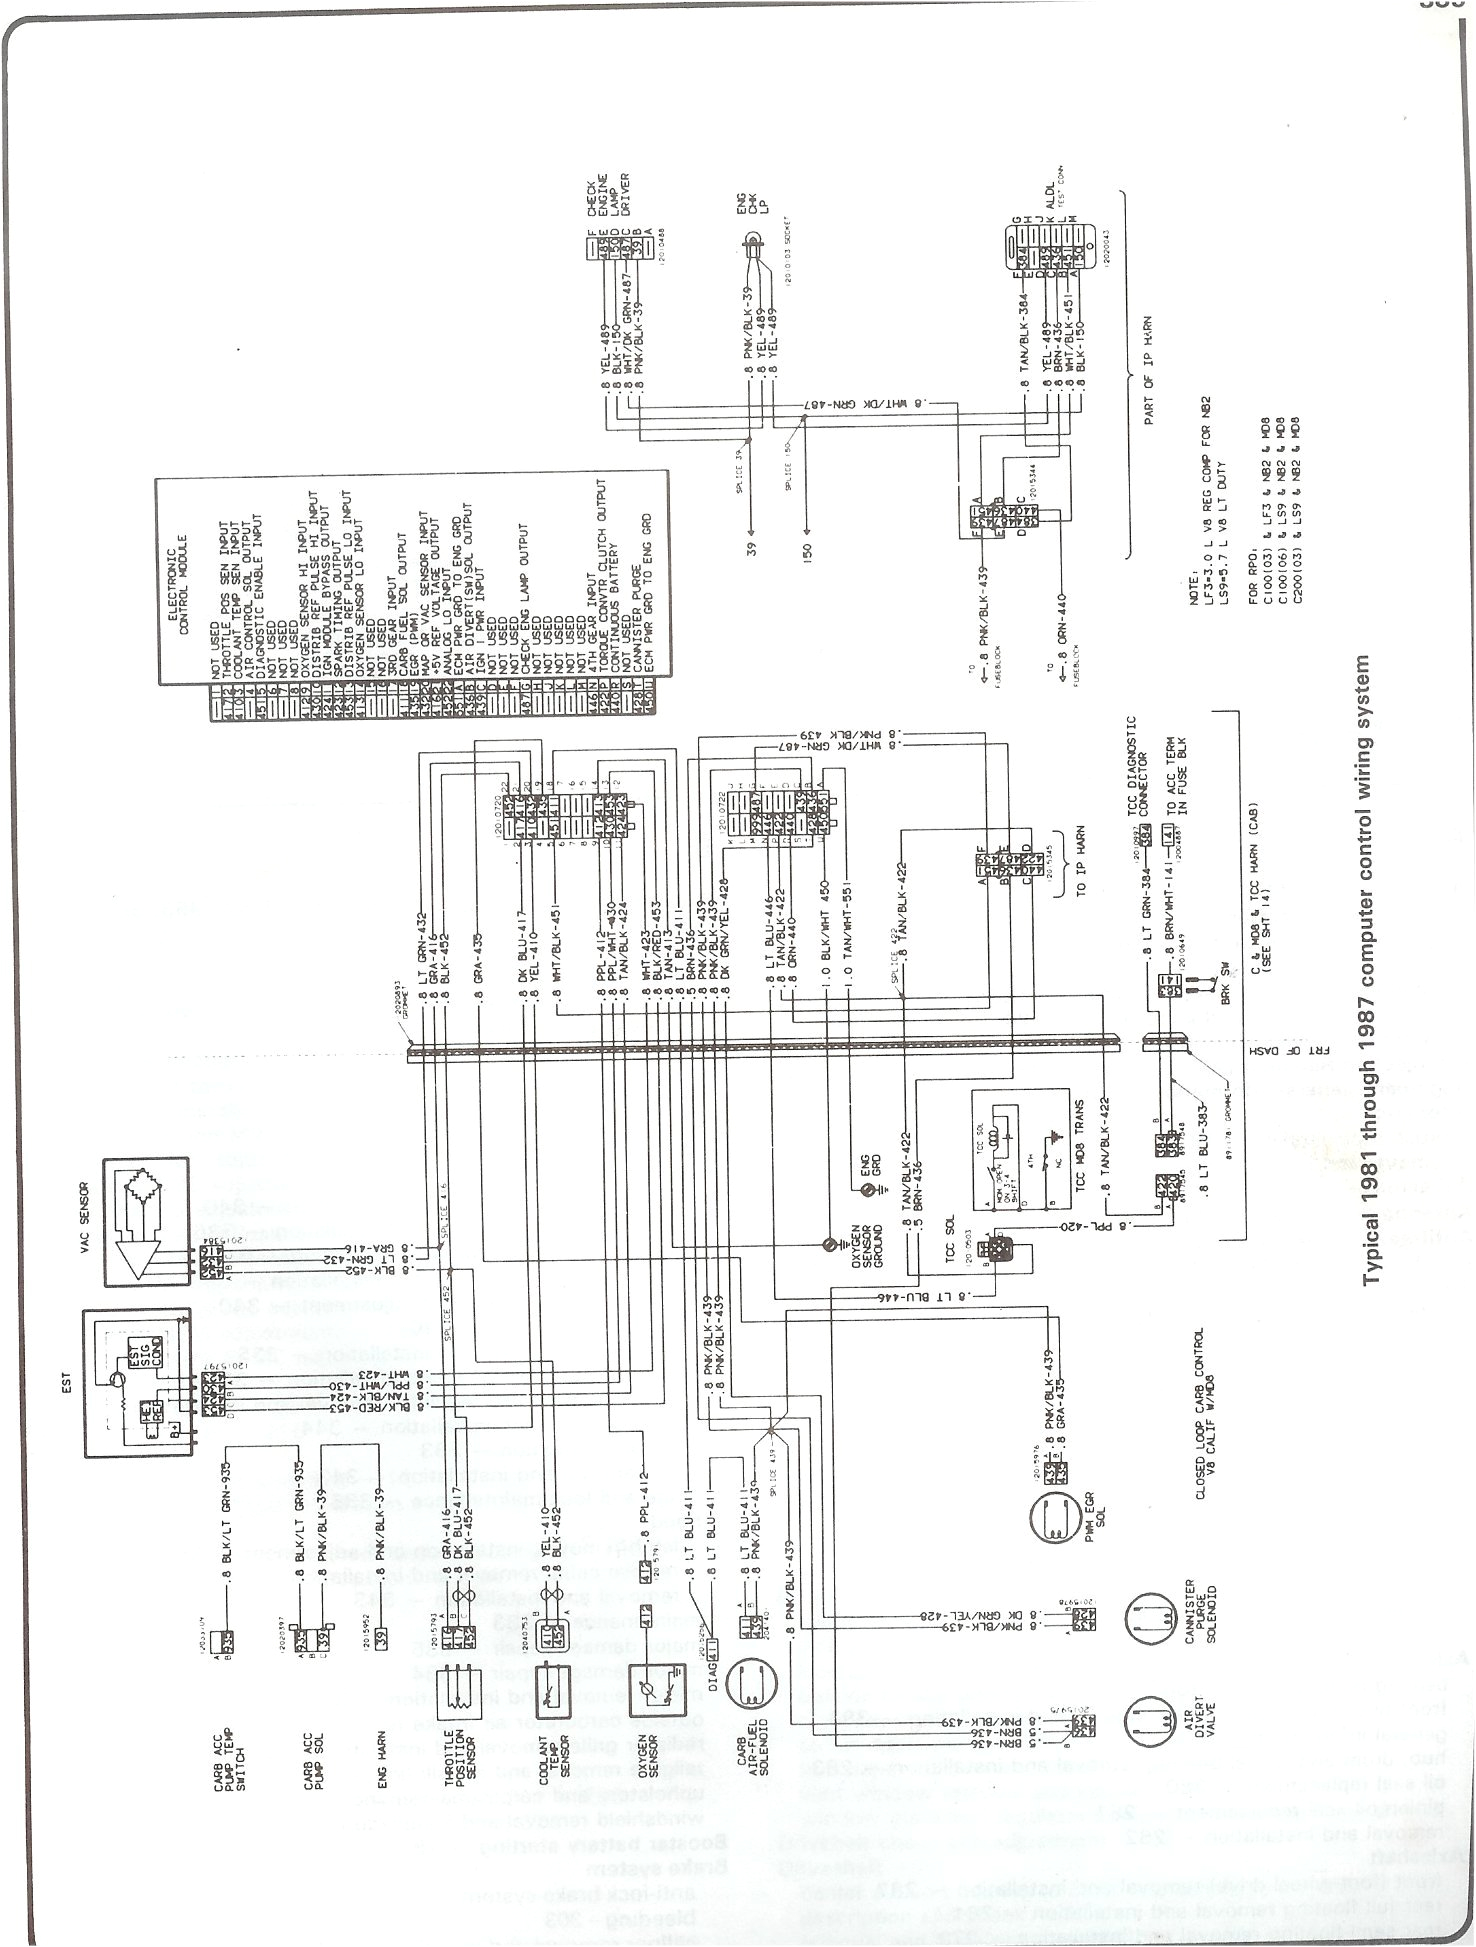 k20 wiring harness diagram wiring diagram diagram moreover 73 87 chevy truck gauge cluster besides 1997 chevy